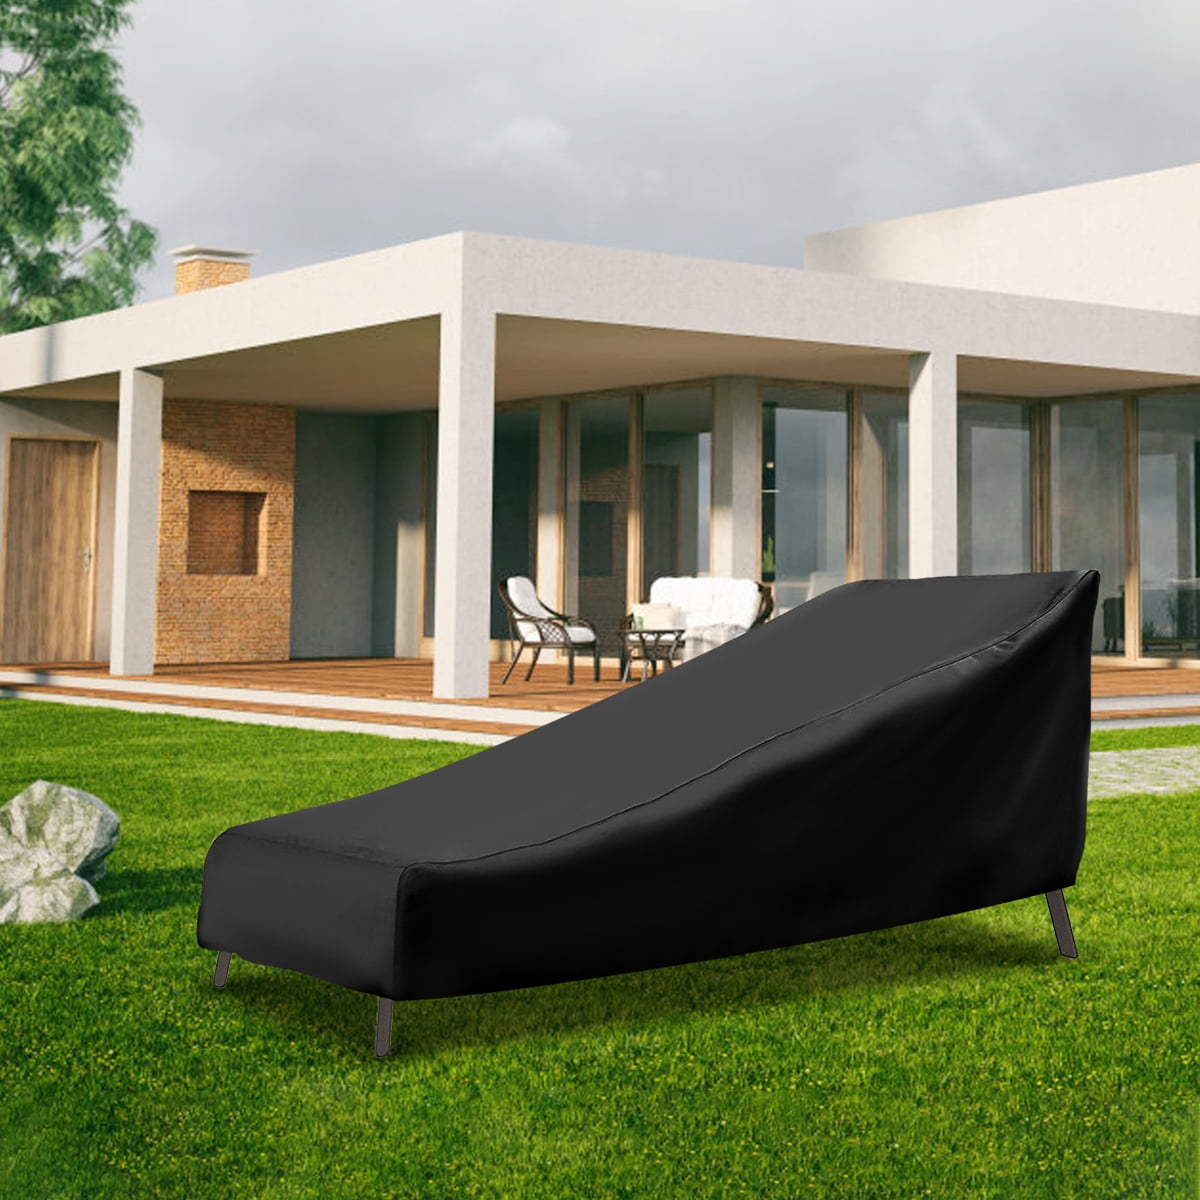 Waterproof Lounge Chair Chaise Cover Outdoor Dustproof Patio Furniture Protector 